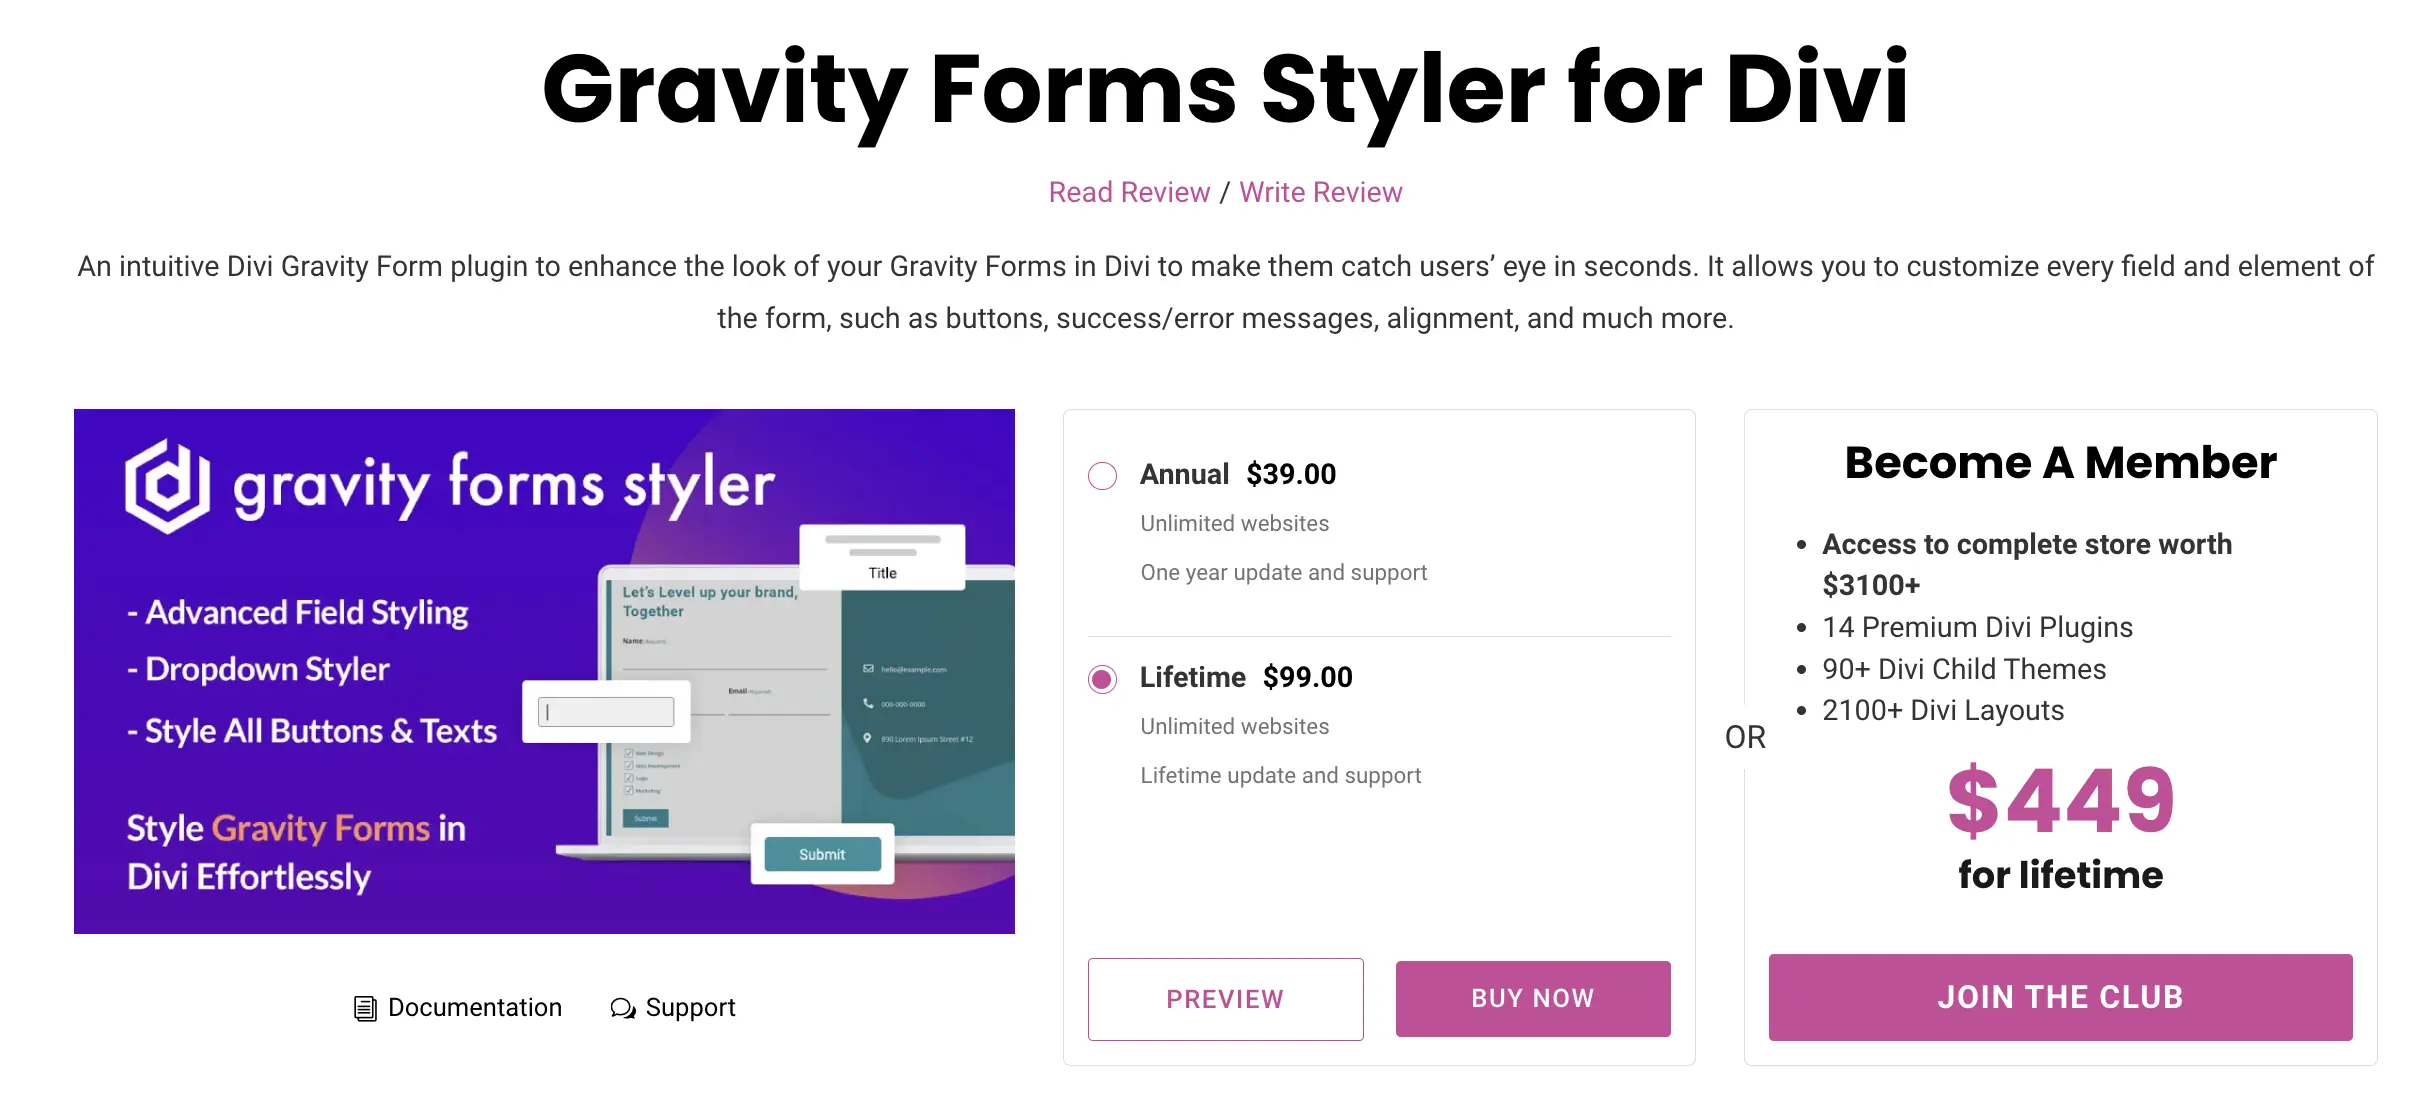 Gravity forms styler plugin for Divi at Divi Extended